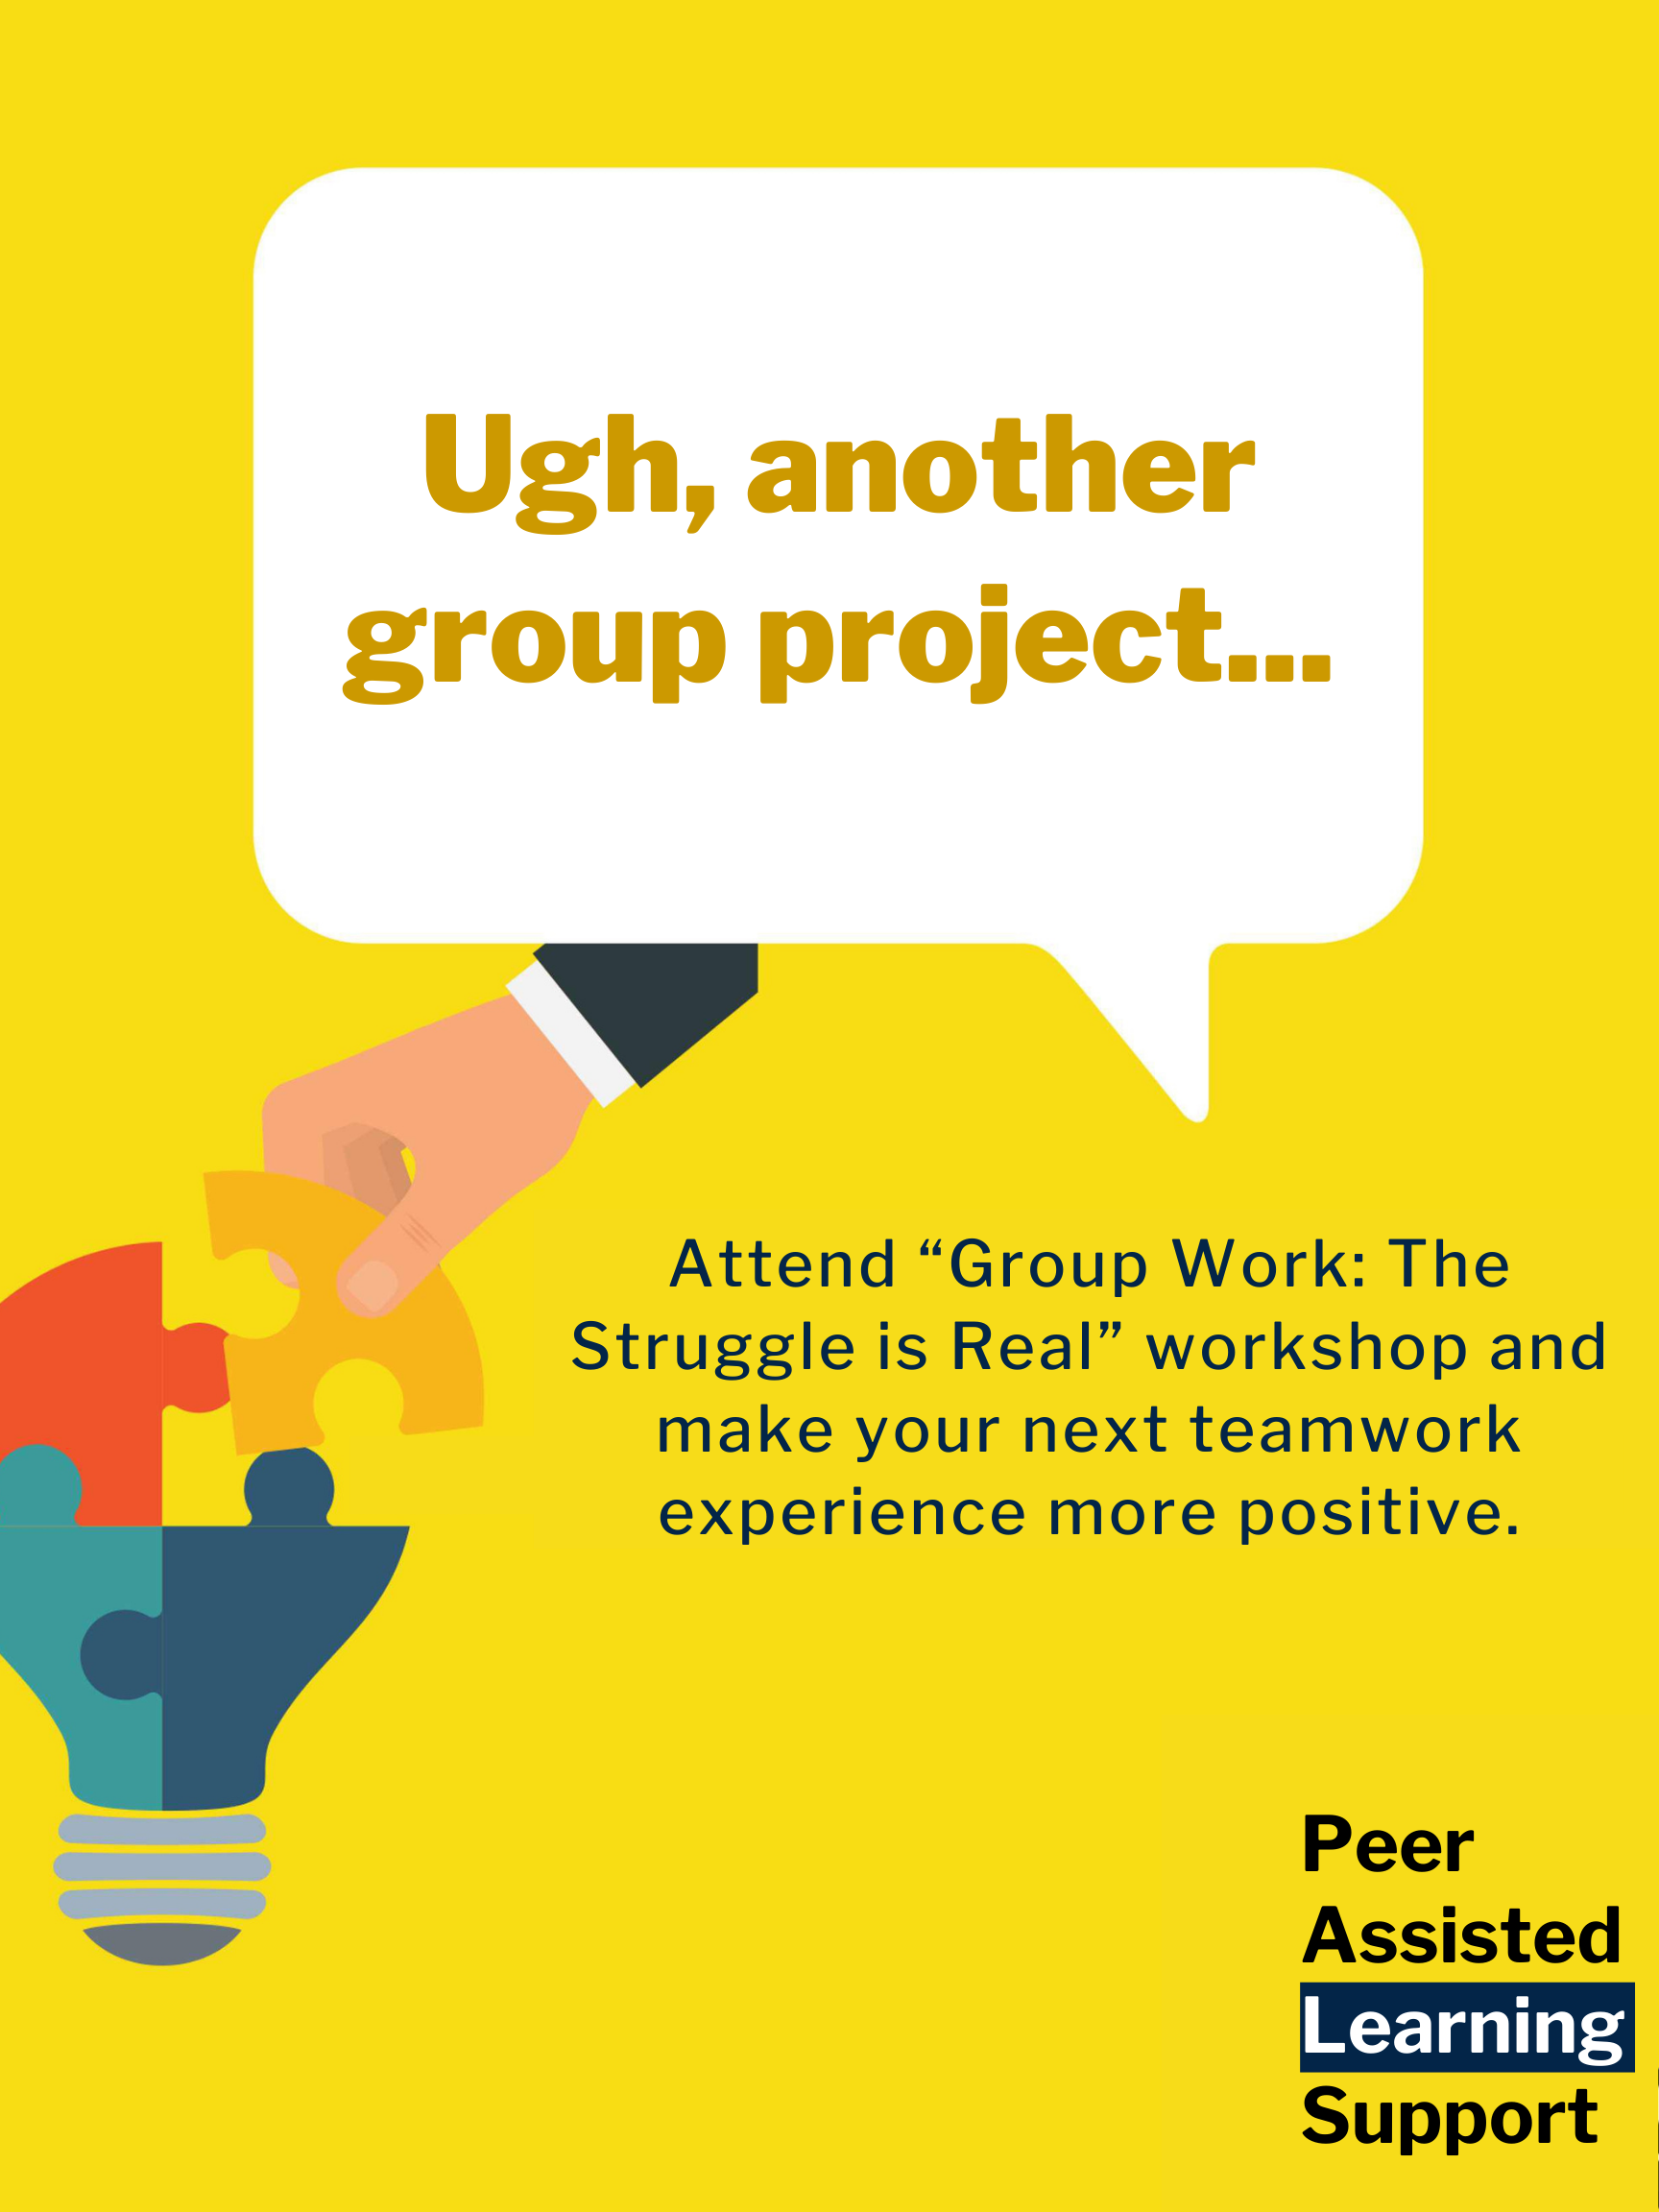 "Ugh, another group project..." in a speech bubble